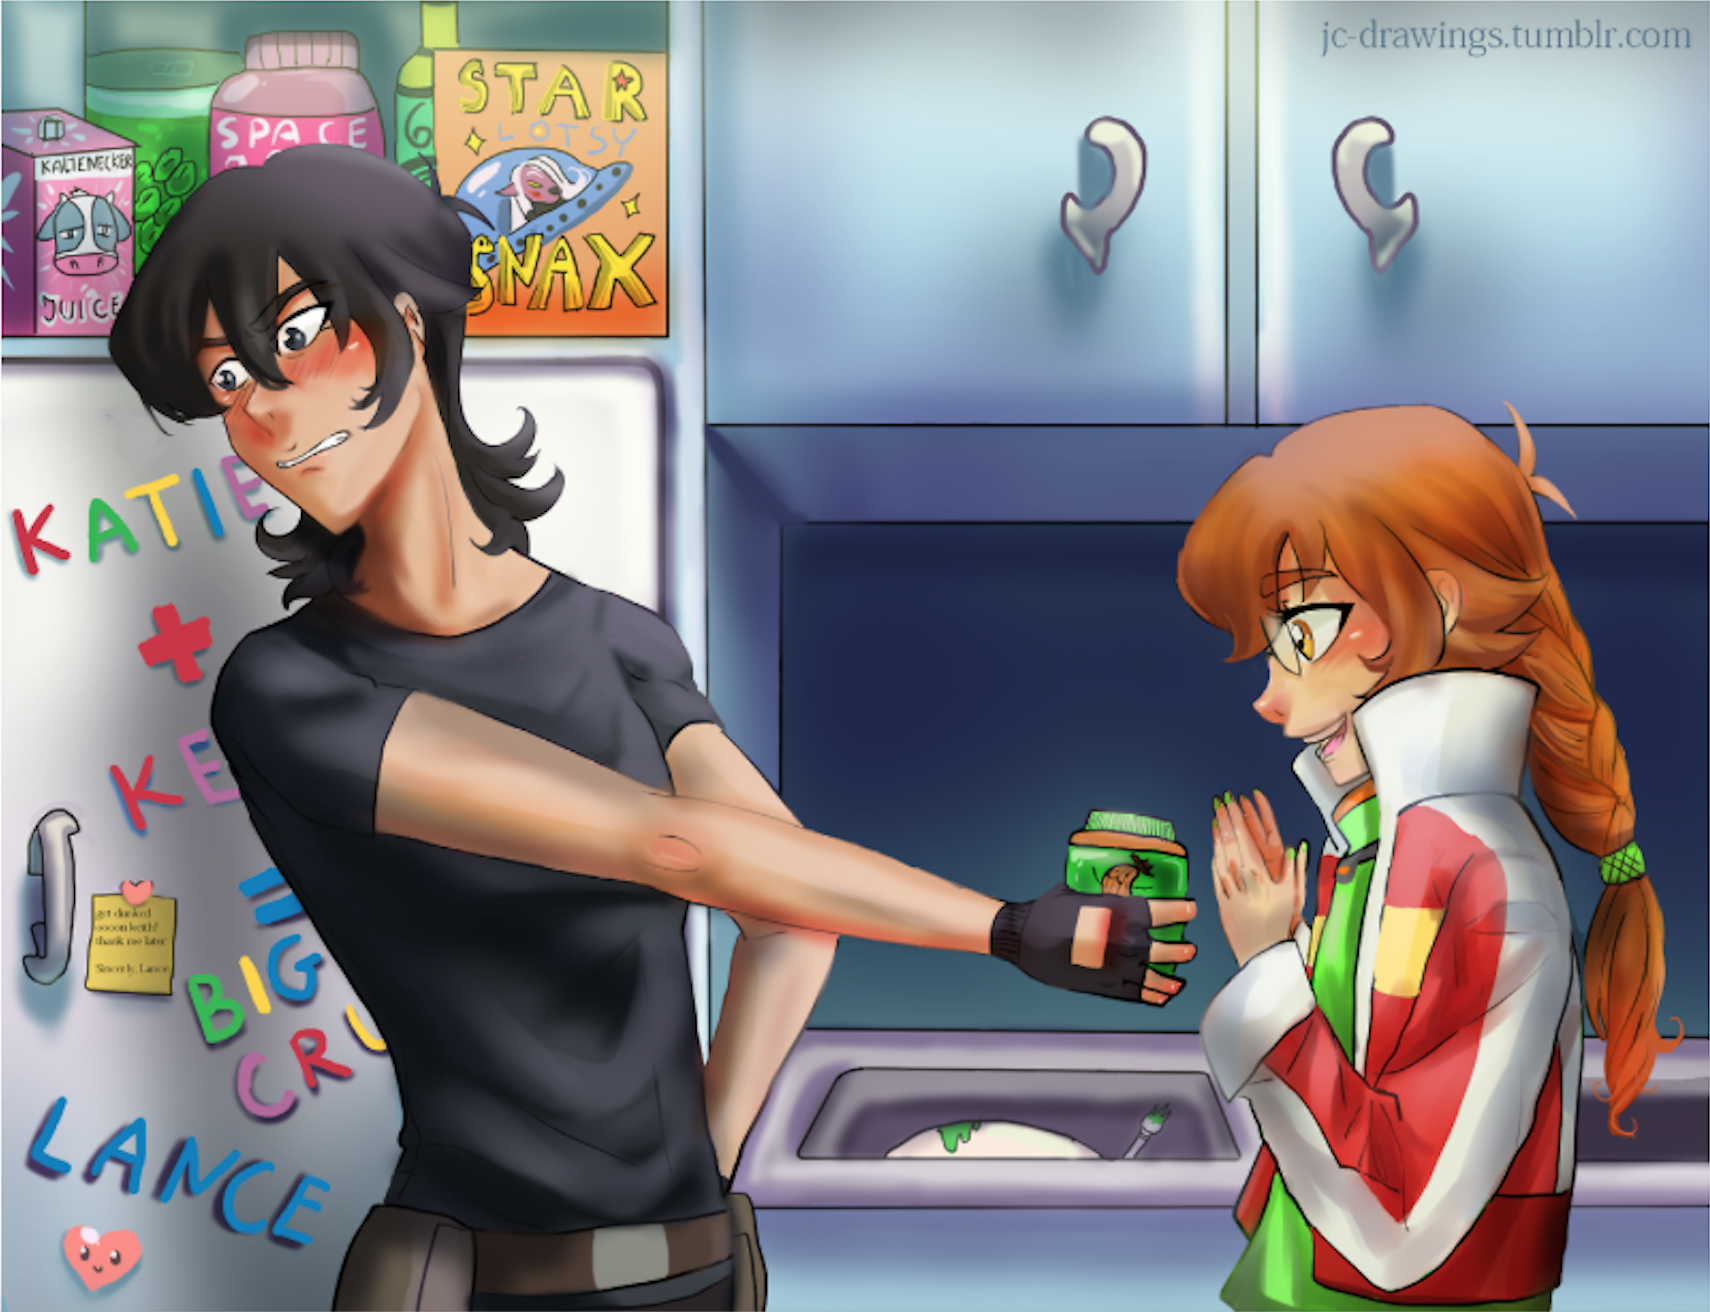 Keith gave a jar of peanut butter to his crush, Pidge from Voltron